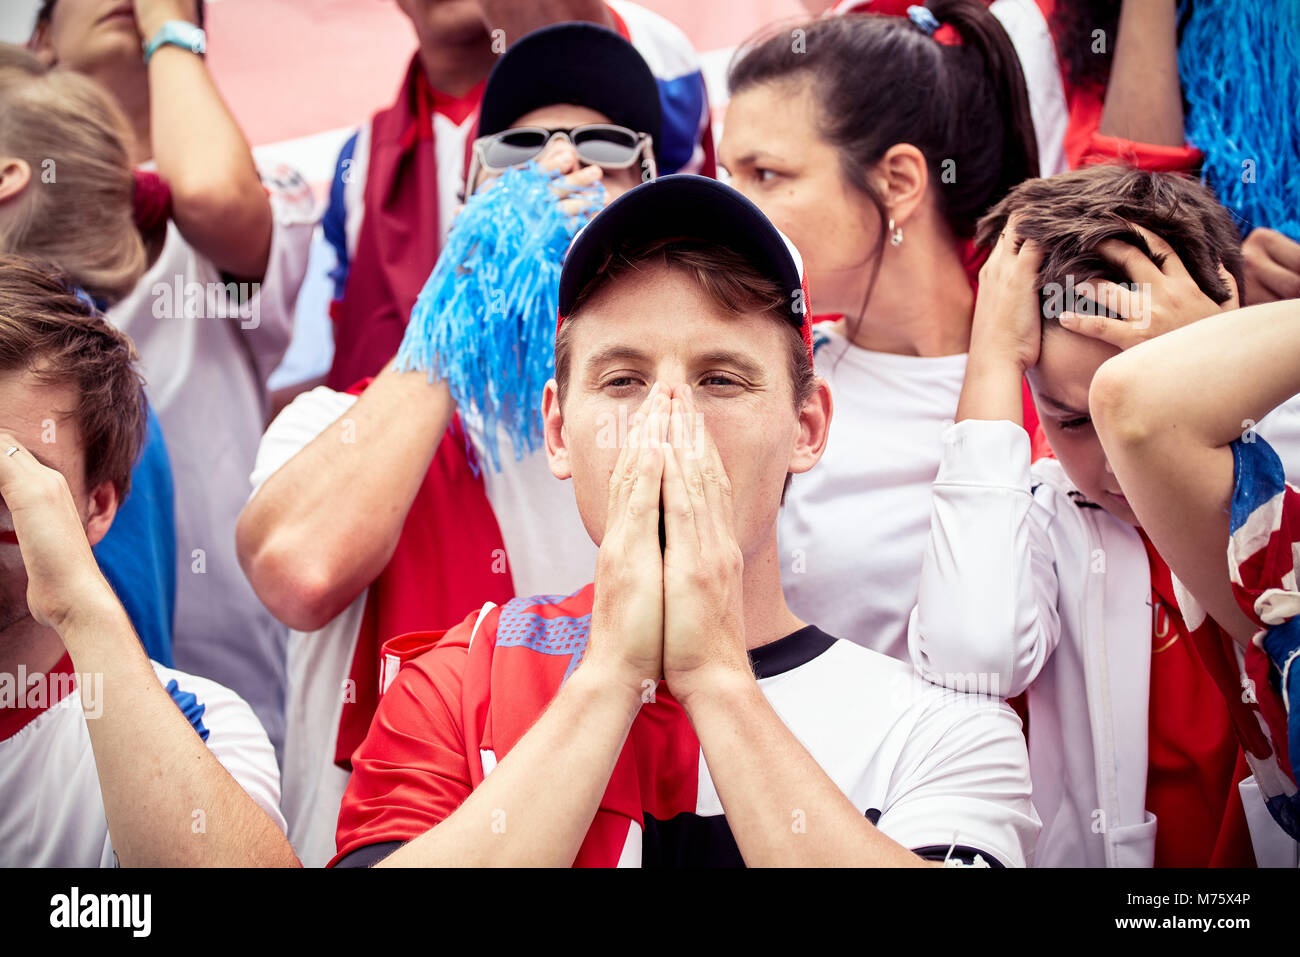 Football fans expressing disappointment at football match Stock Photo